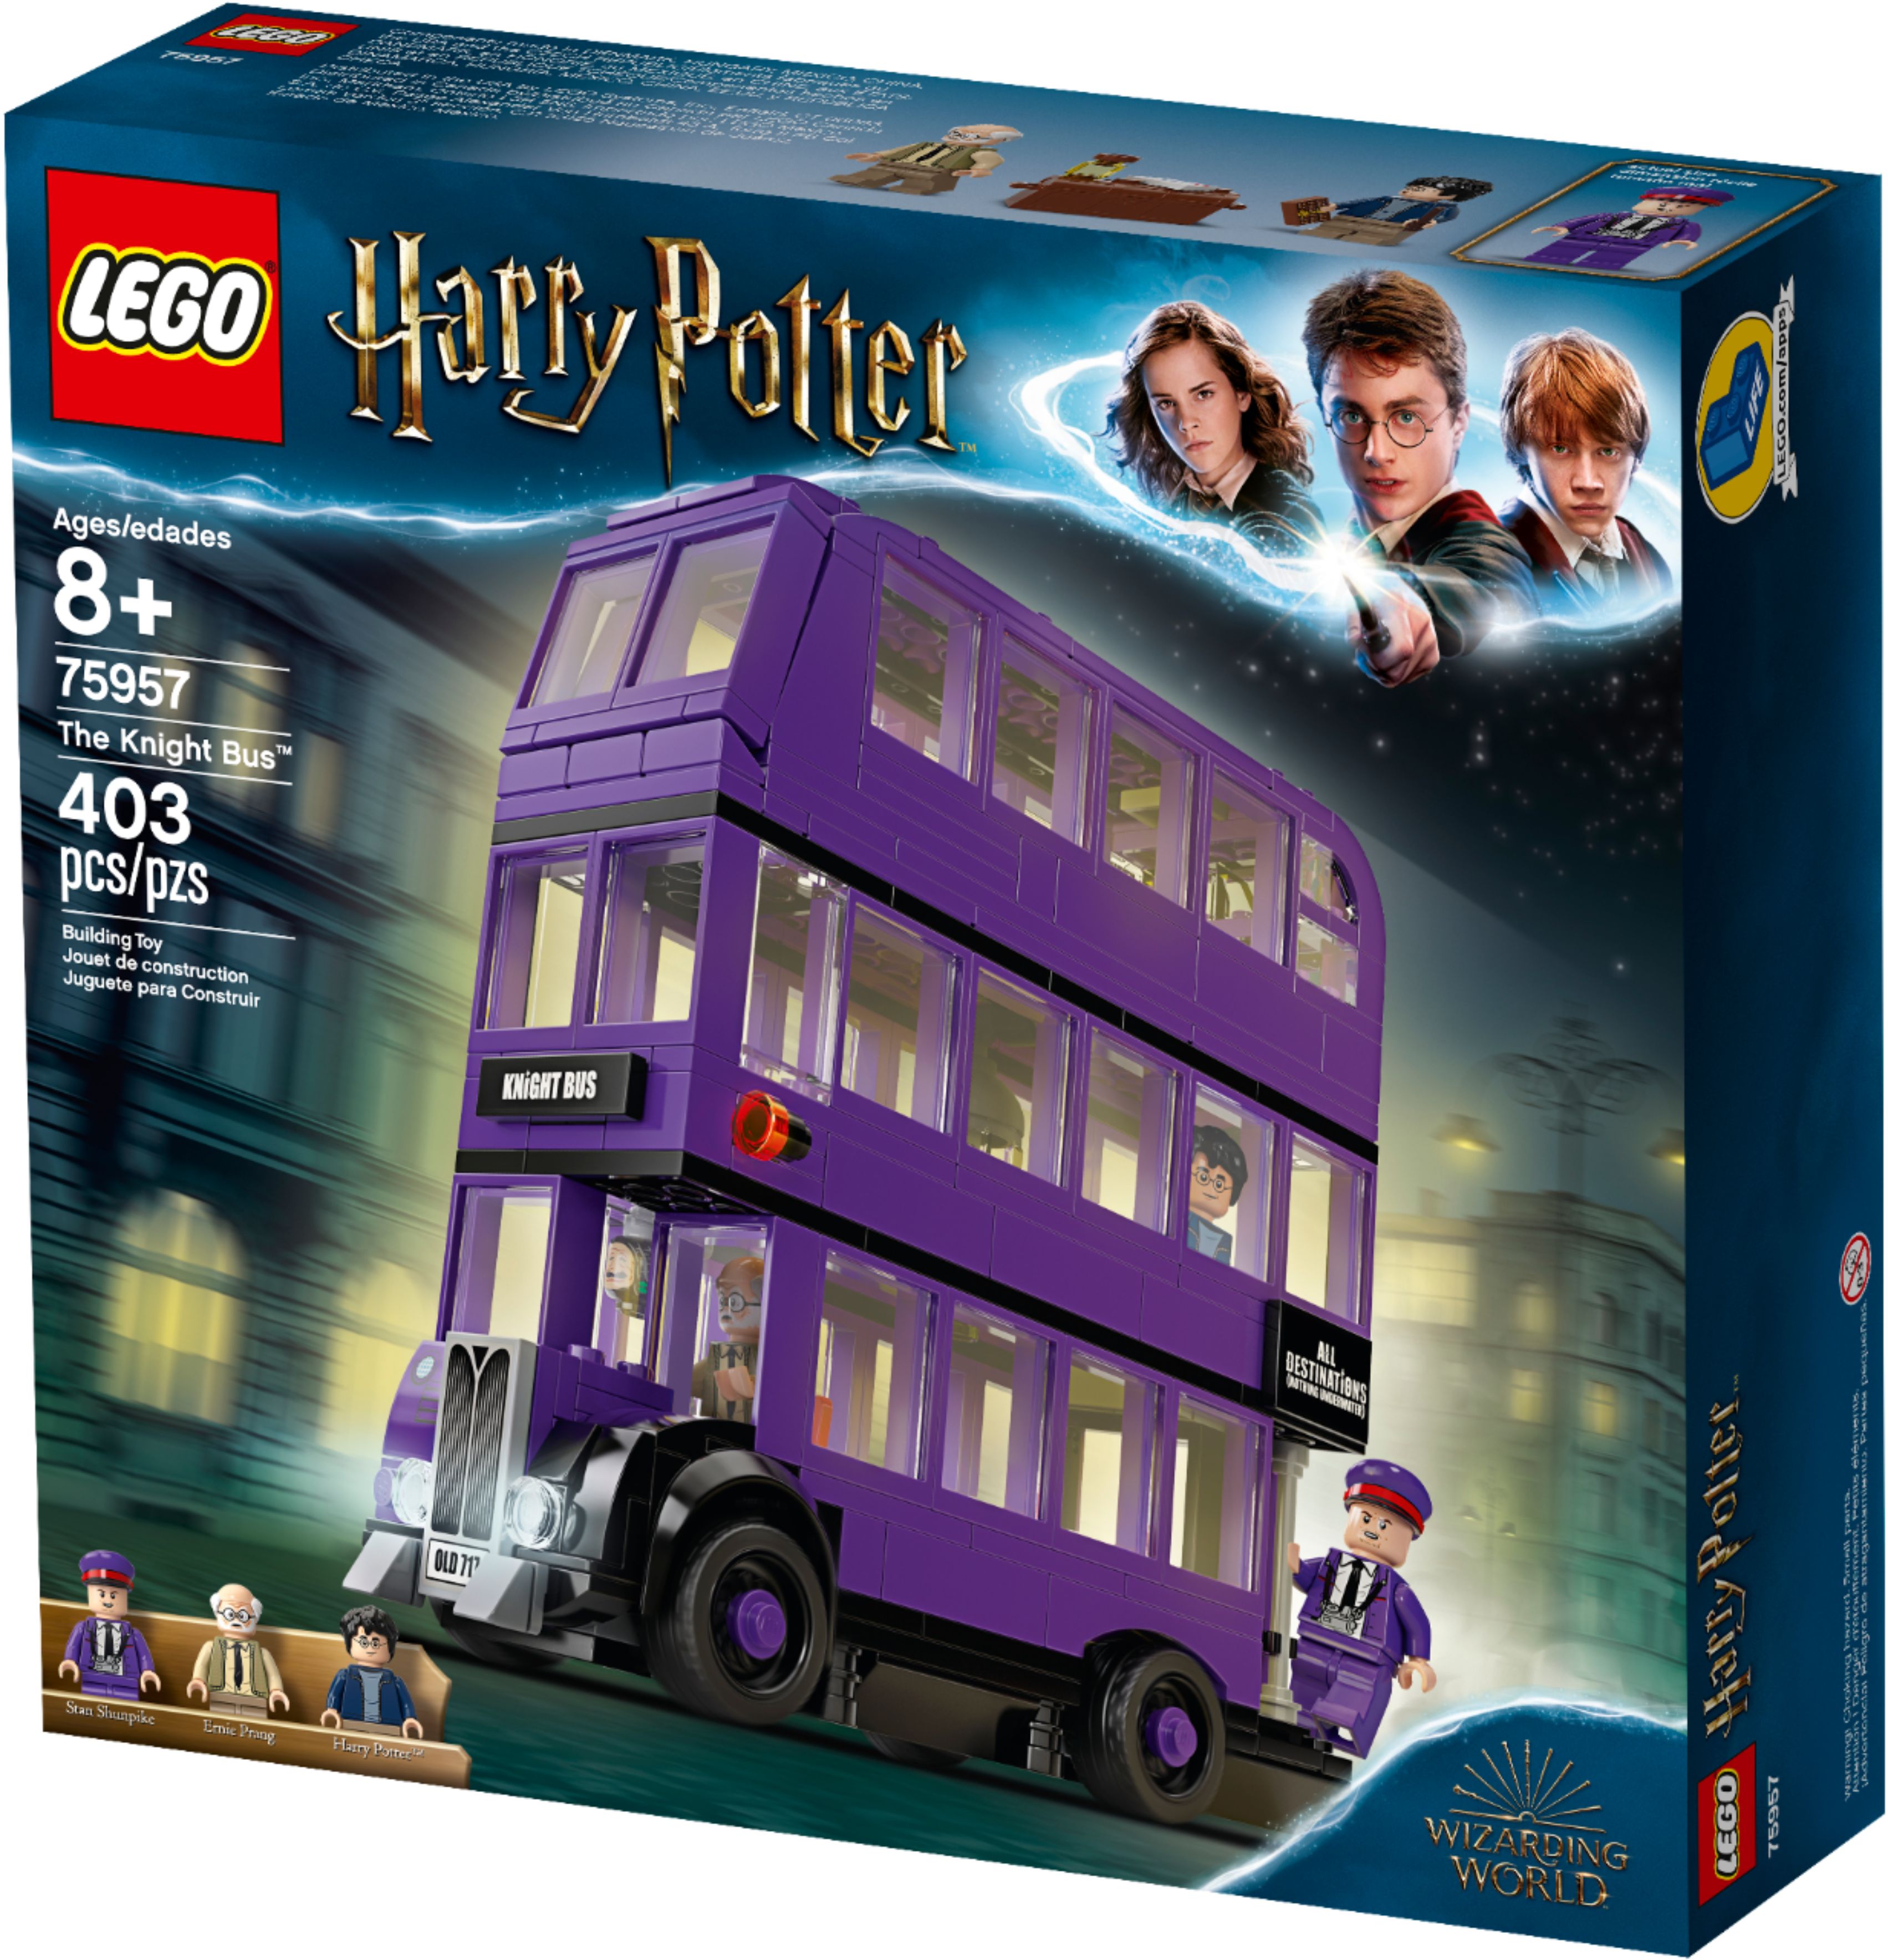 LEGO The Knight Bus Harry Potter TM for sale online 75957